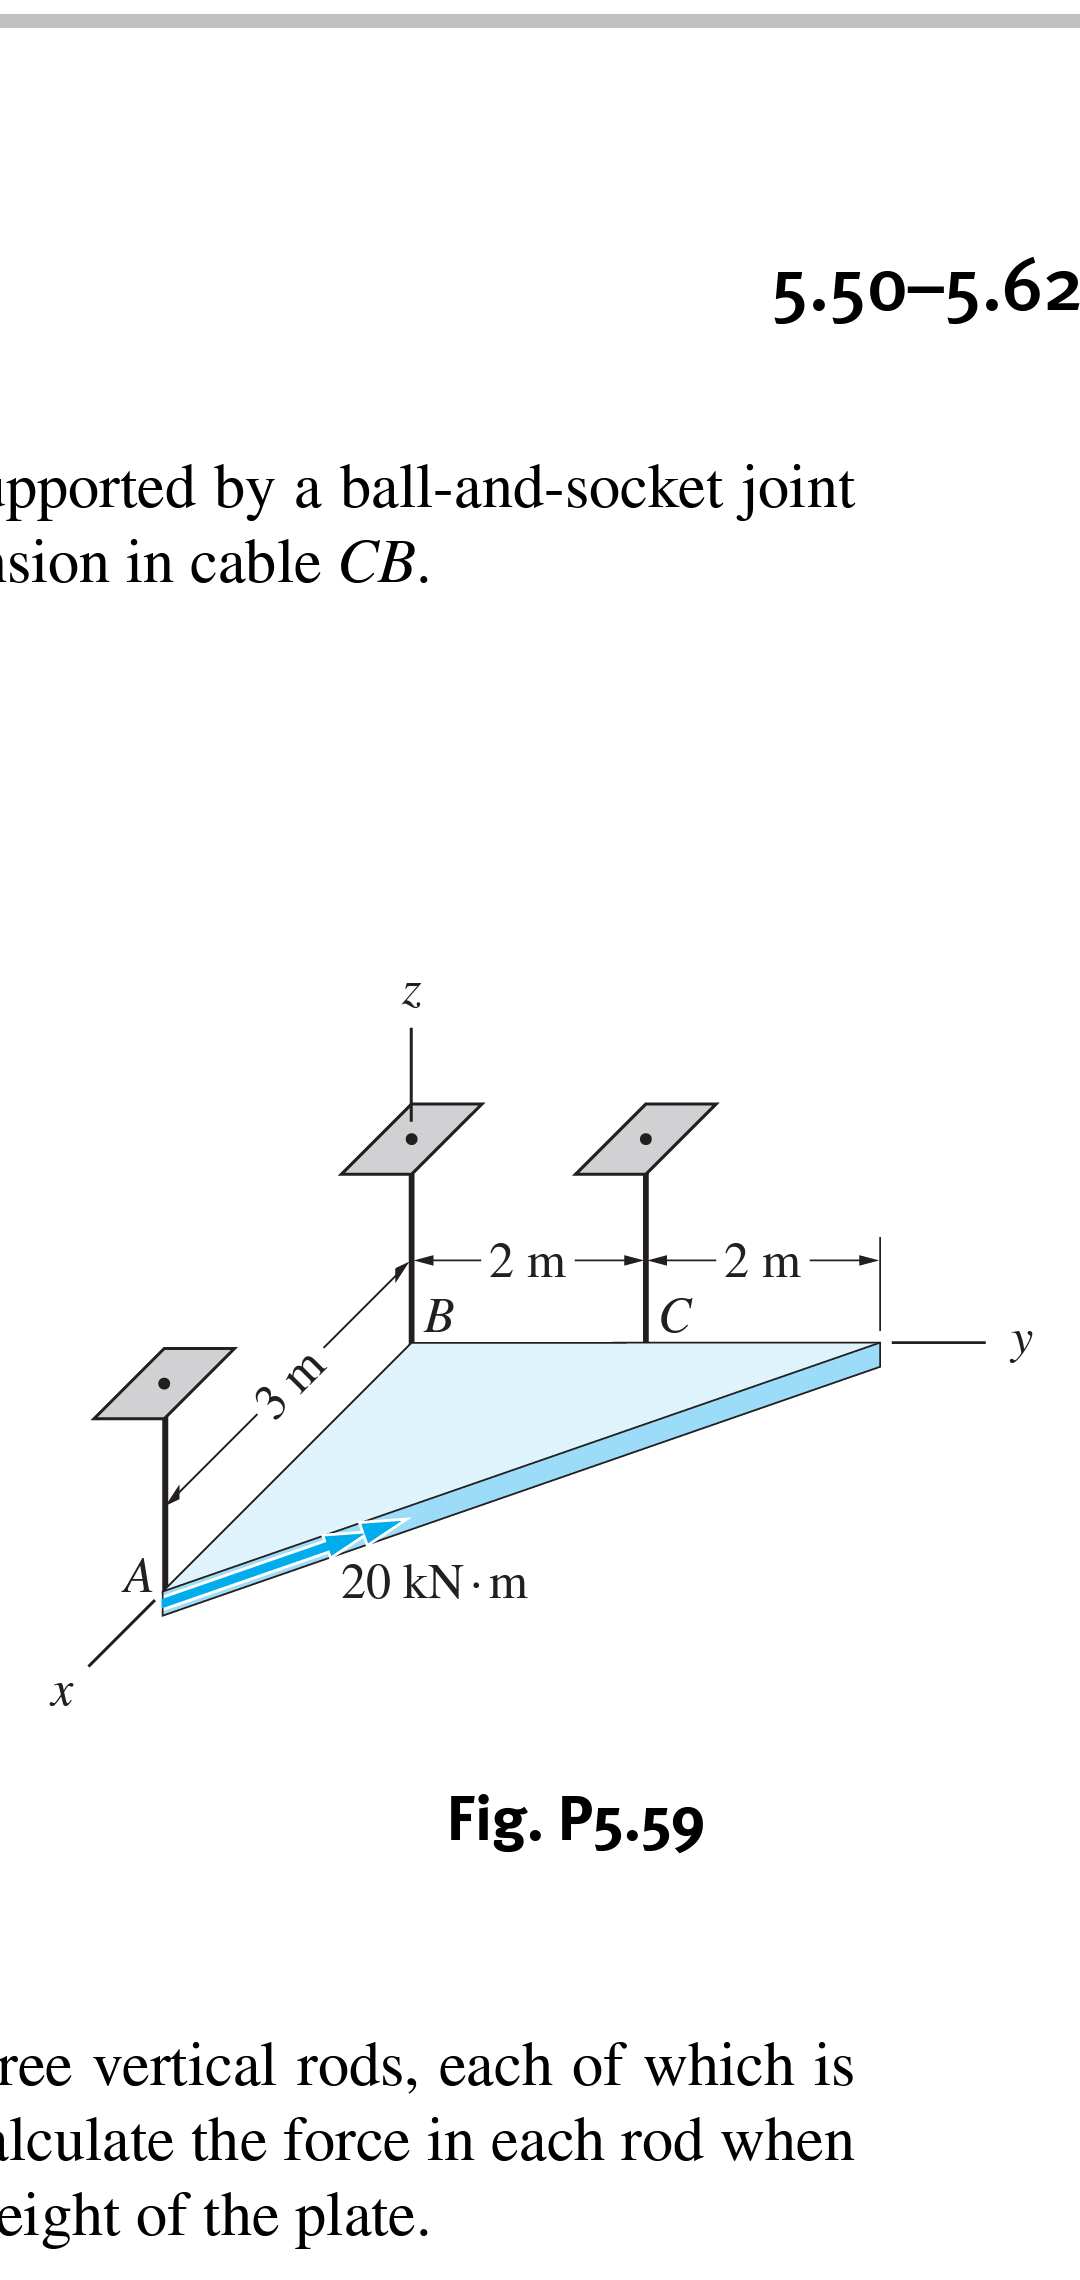 5.50-5.62
pported by a ball-and-socket joint
sion in cable CB
Z.
2 m
2 m
В
С
y
3 m
A
20 kN m
X
Fig. P5.59
ree vertical rods, each of which is
lculate the force in each rod when
eight of the plate.
